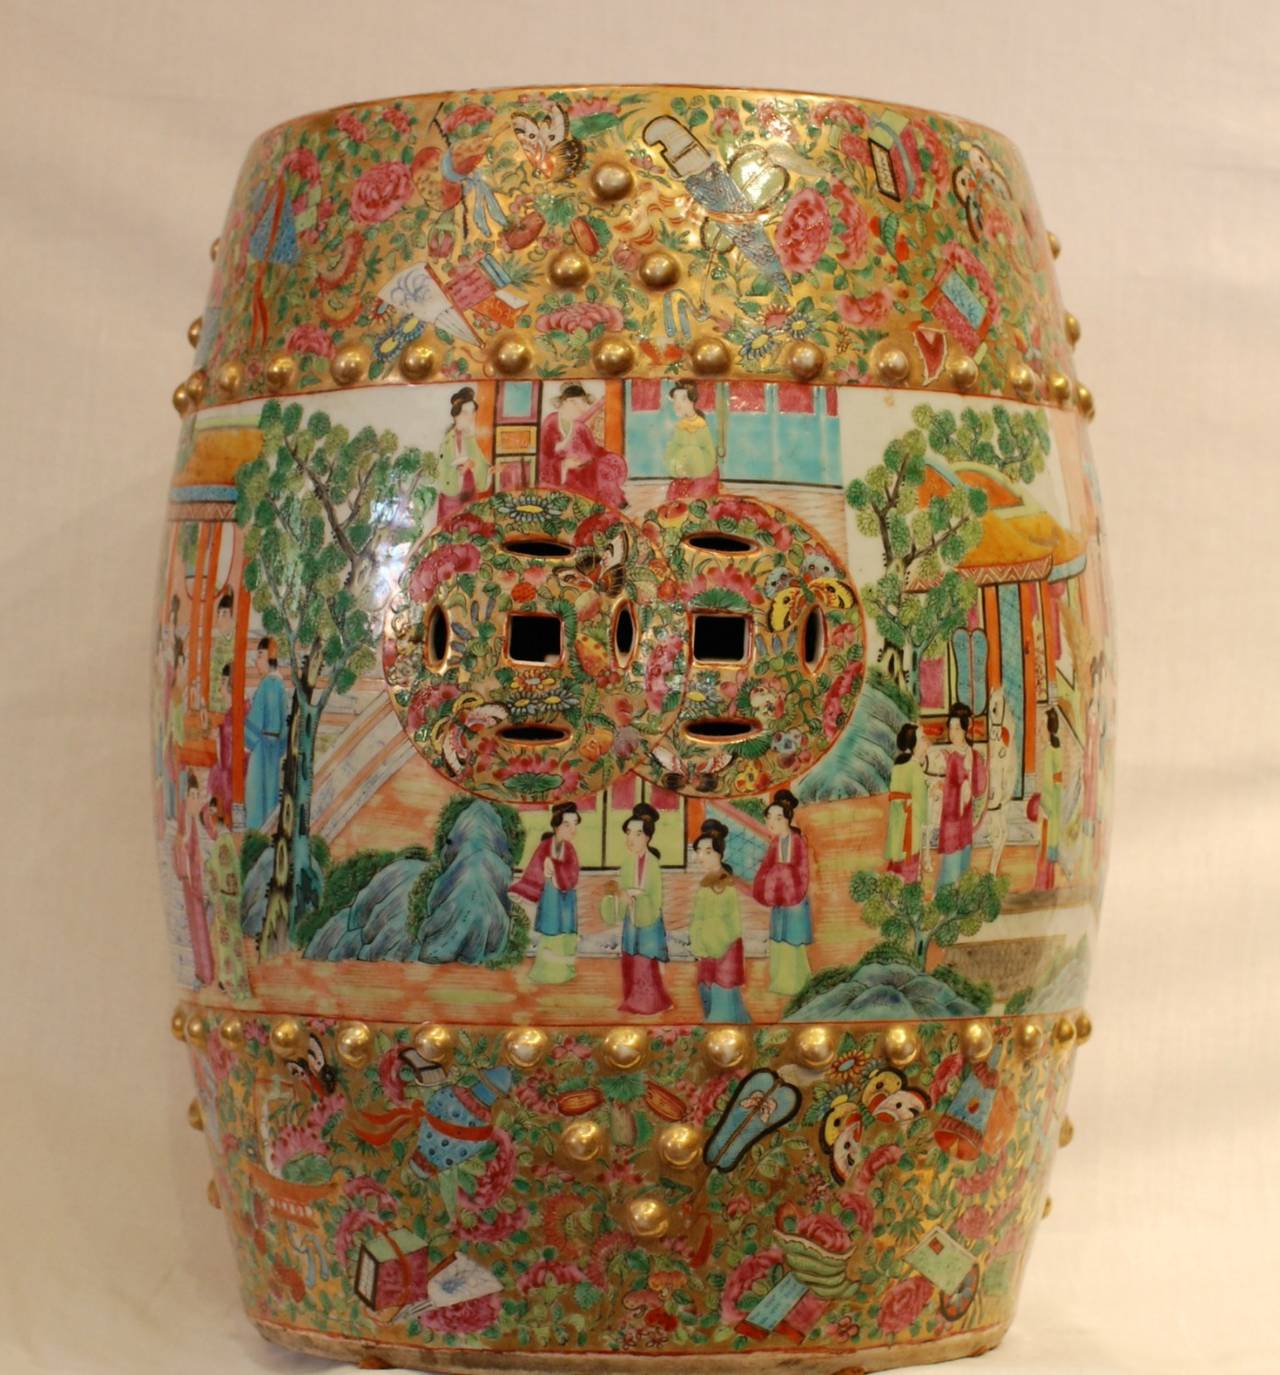 Of ovoid shaped hand colored polychrome porcelain gilt decorations of Palace scenes and friezes adorned with butterflies and Chinese objects